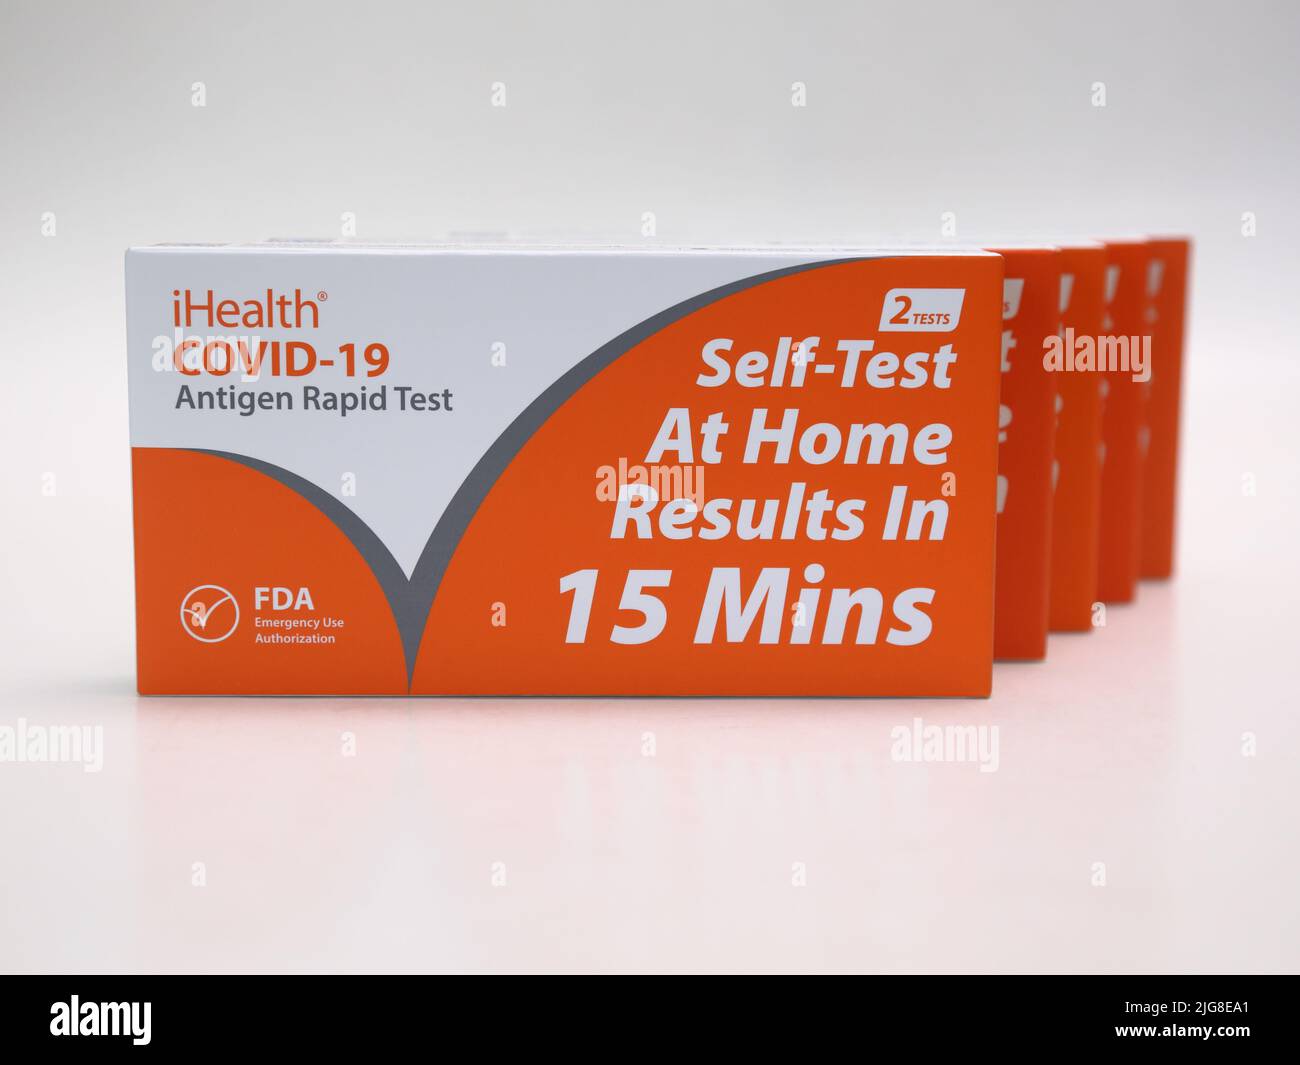 USA - July 8, 2022: Five new boxes containing iHealth brand COVID-19 antigen rapid tests are shown isolated against a white background. Stock Photo